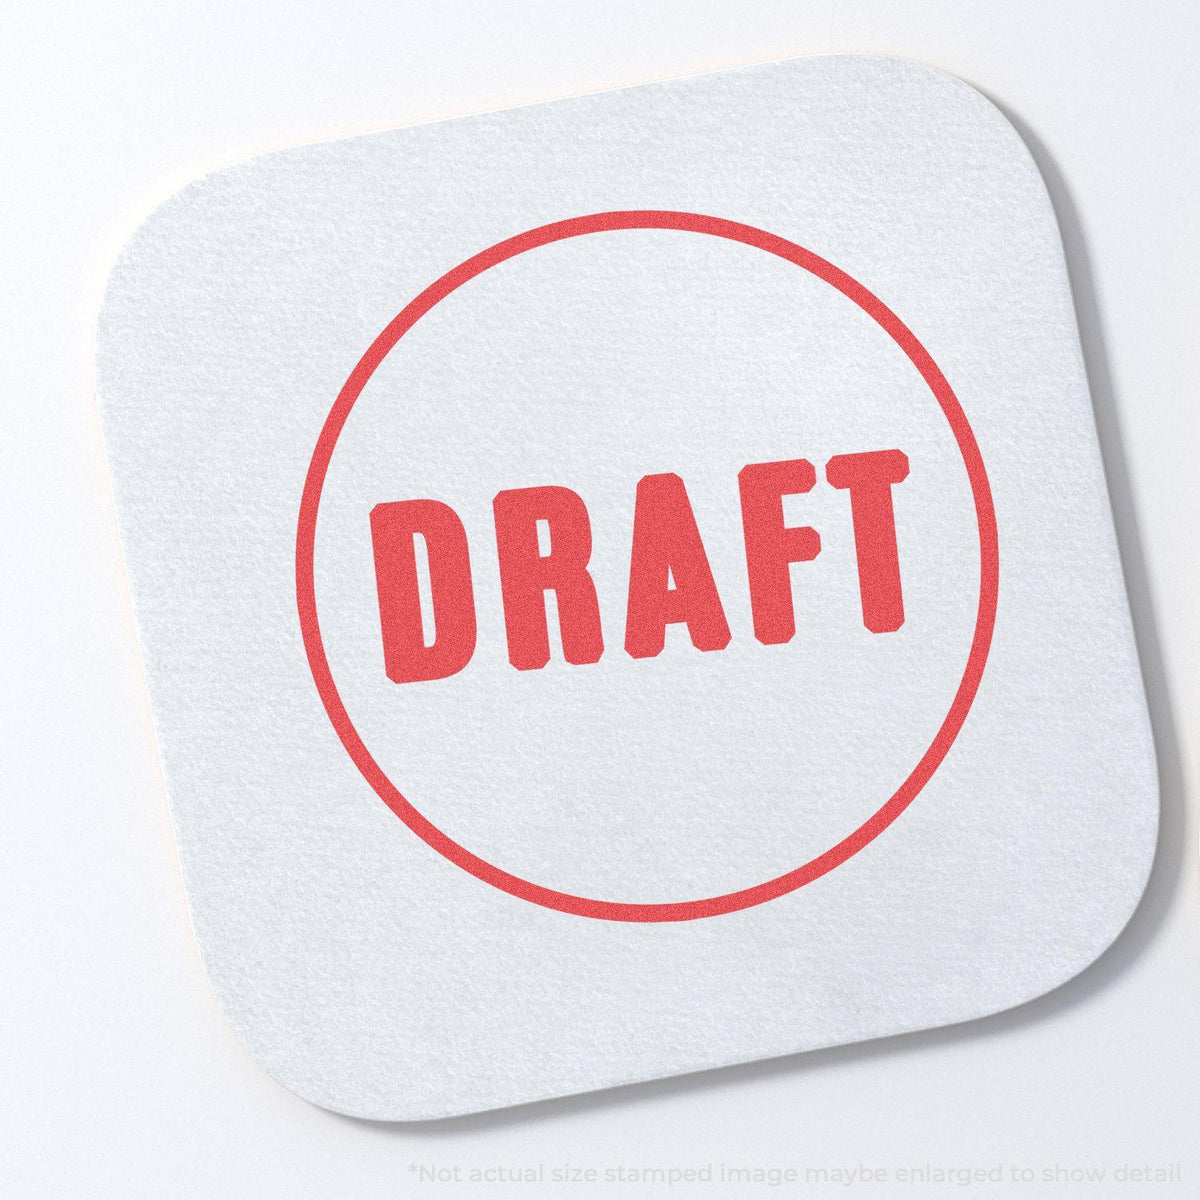 In Use Photo of Round Draft Xstamper Stamp